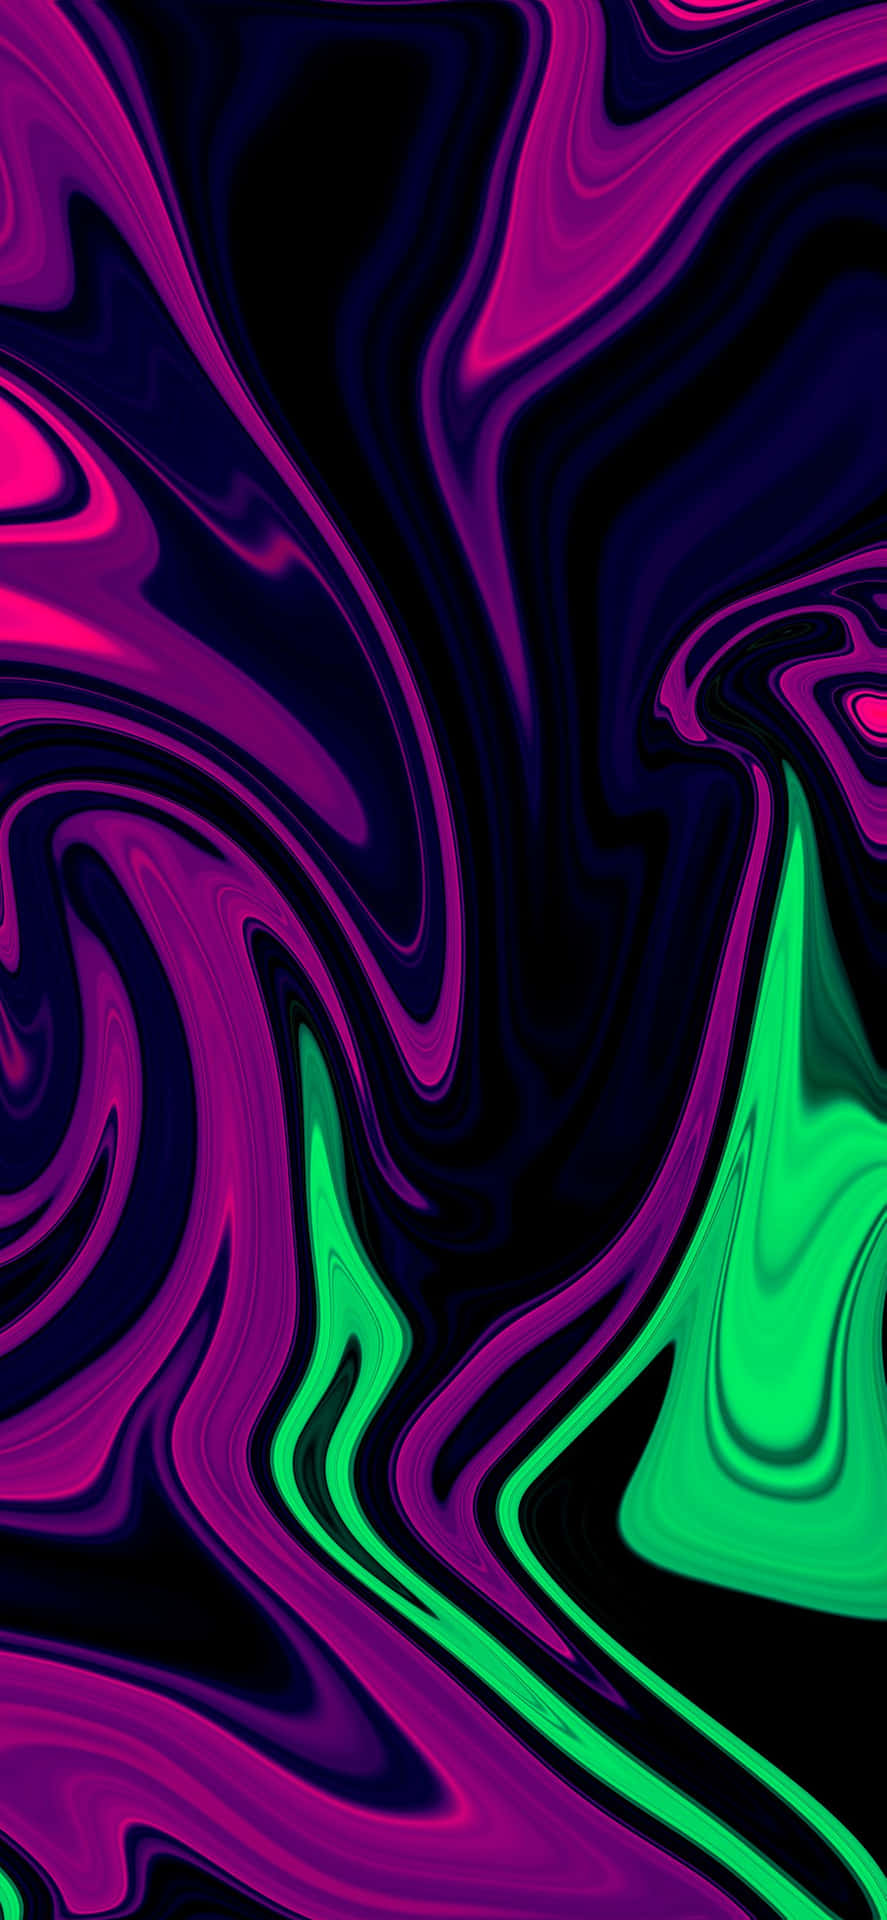 Colorful Negon Green and Purple Abstraction Wallpaper